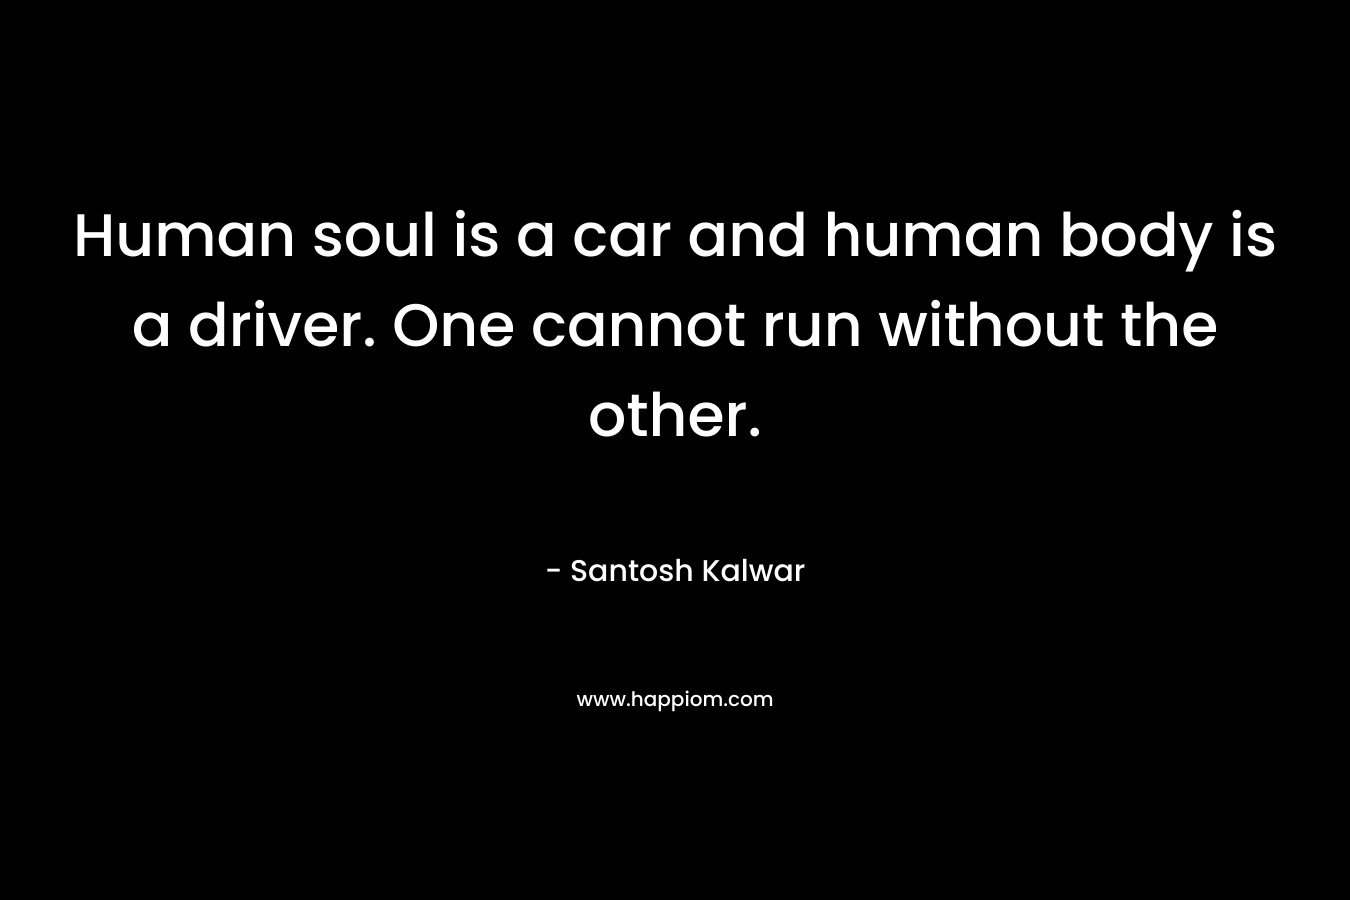 Human soul is a car and human body is a driver. One cannot run without the other. – Santosh Kalwar